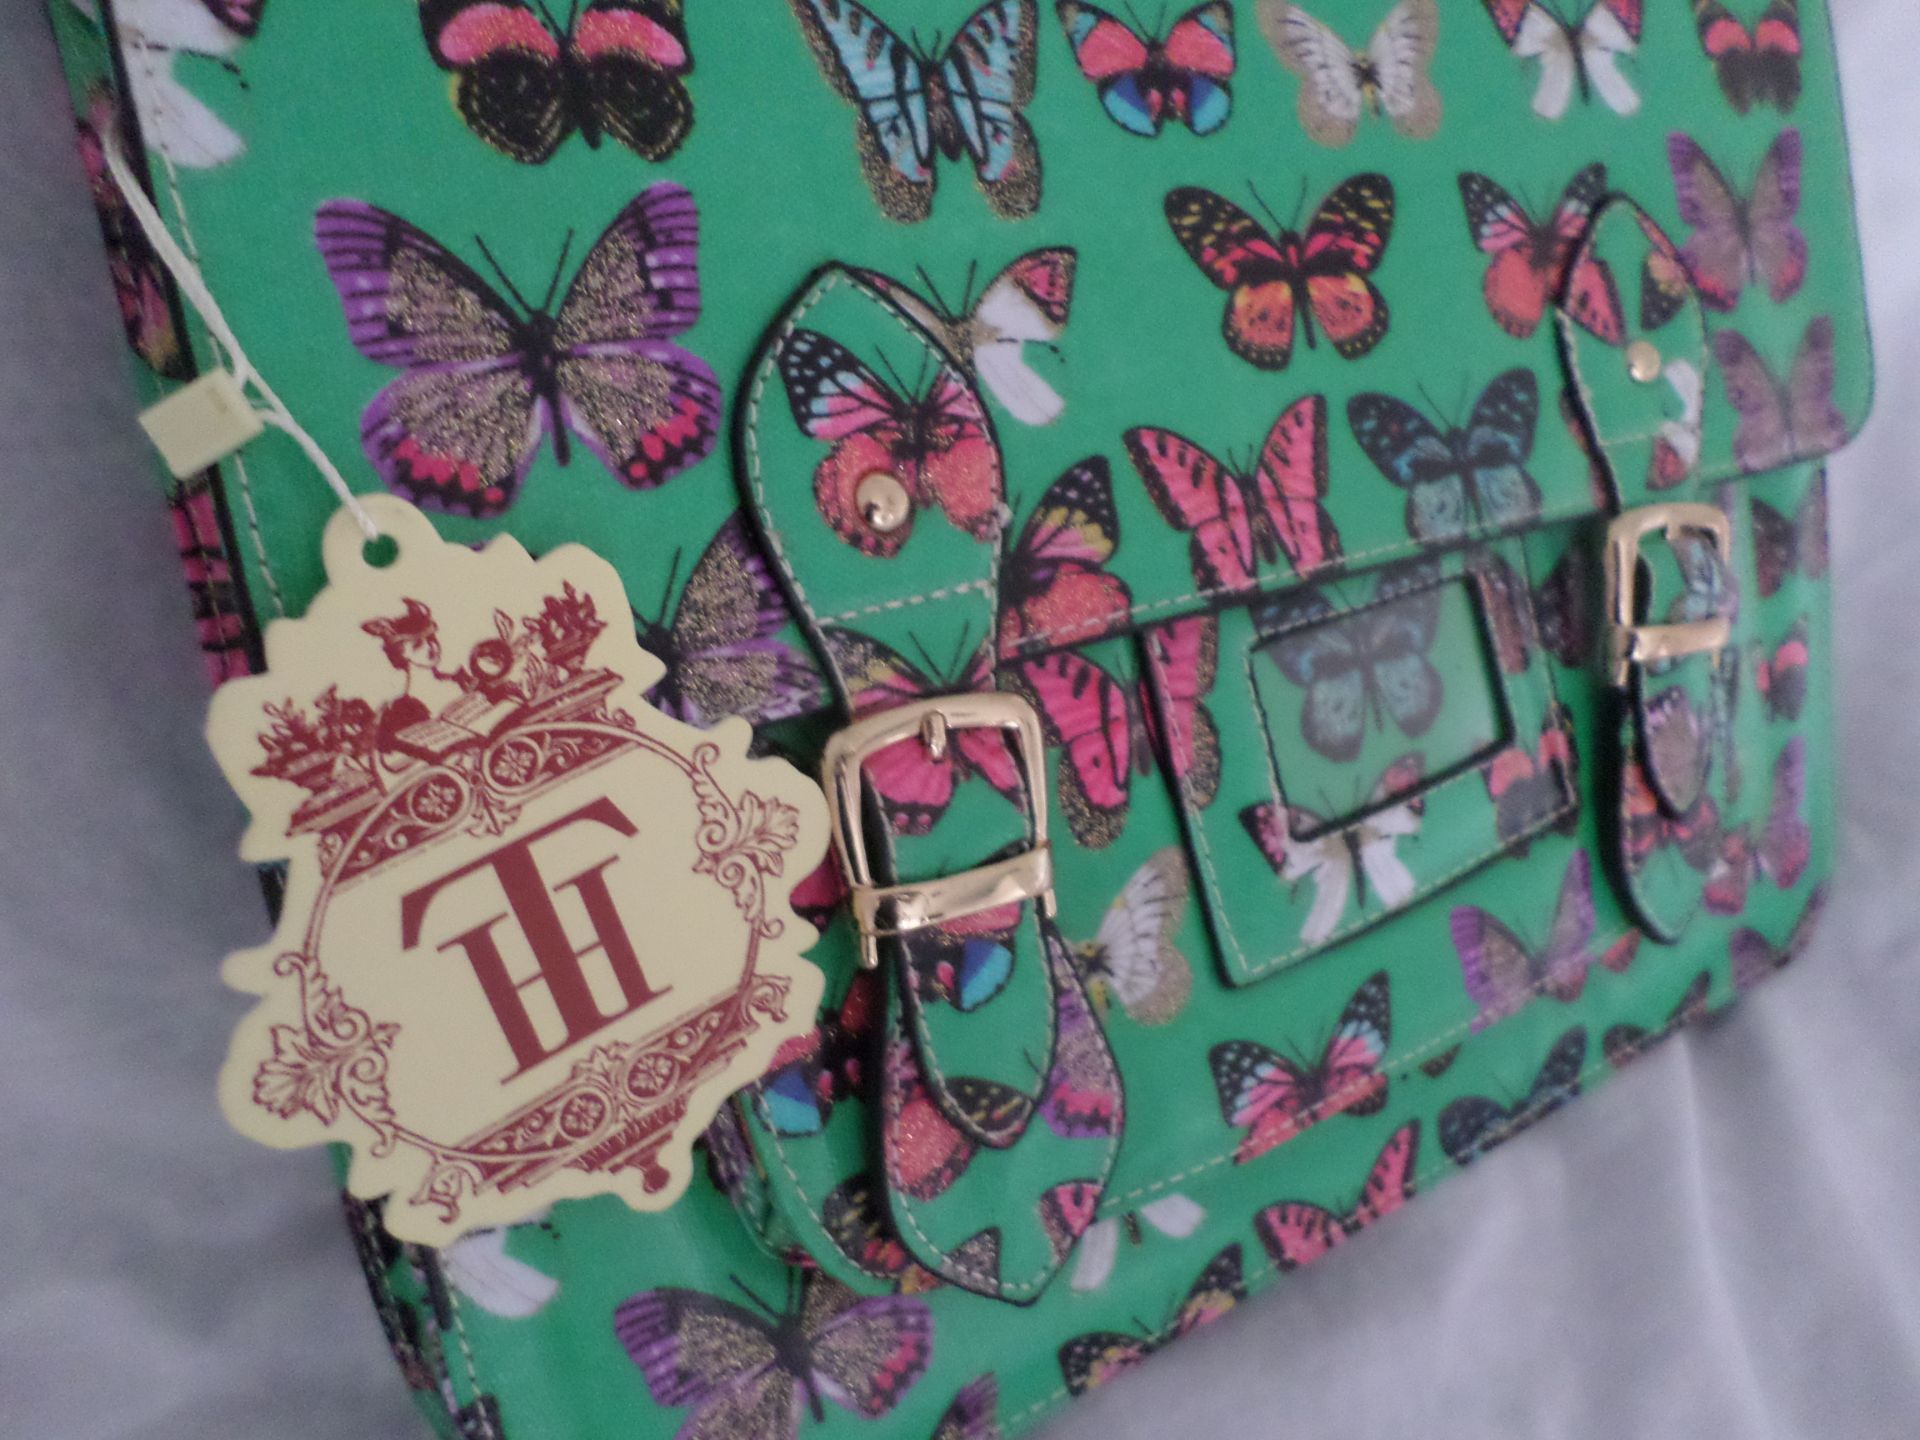 Brand New Ht London Satchel Butterfly Design Rrp £22.99 - Image 2 of 4